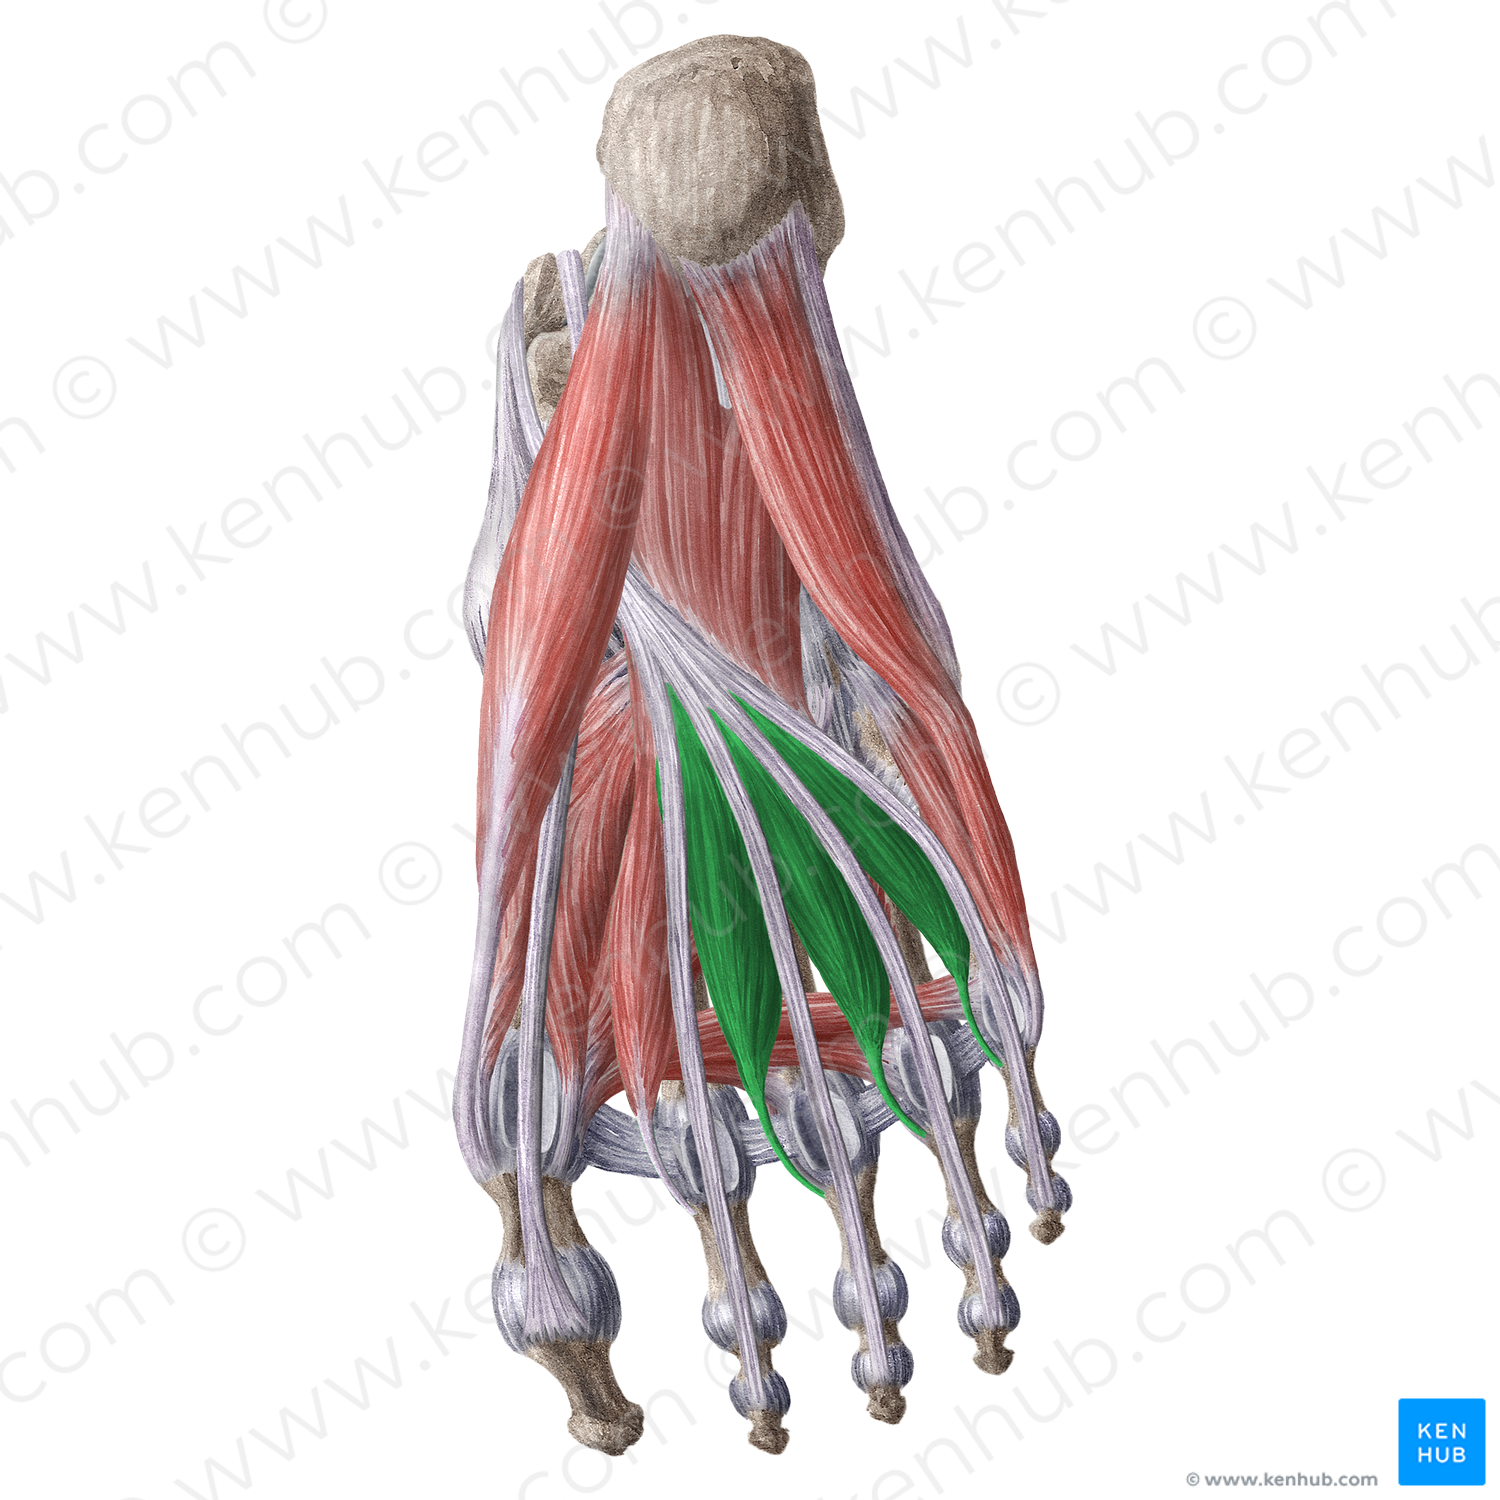 2nd-4th lumbrical muscles of foot (#16189)